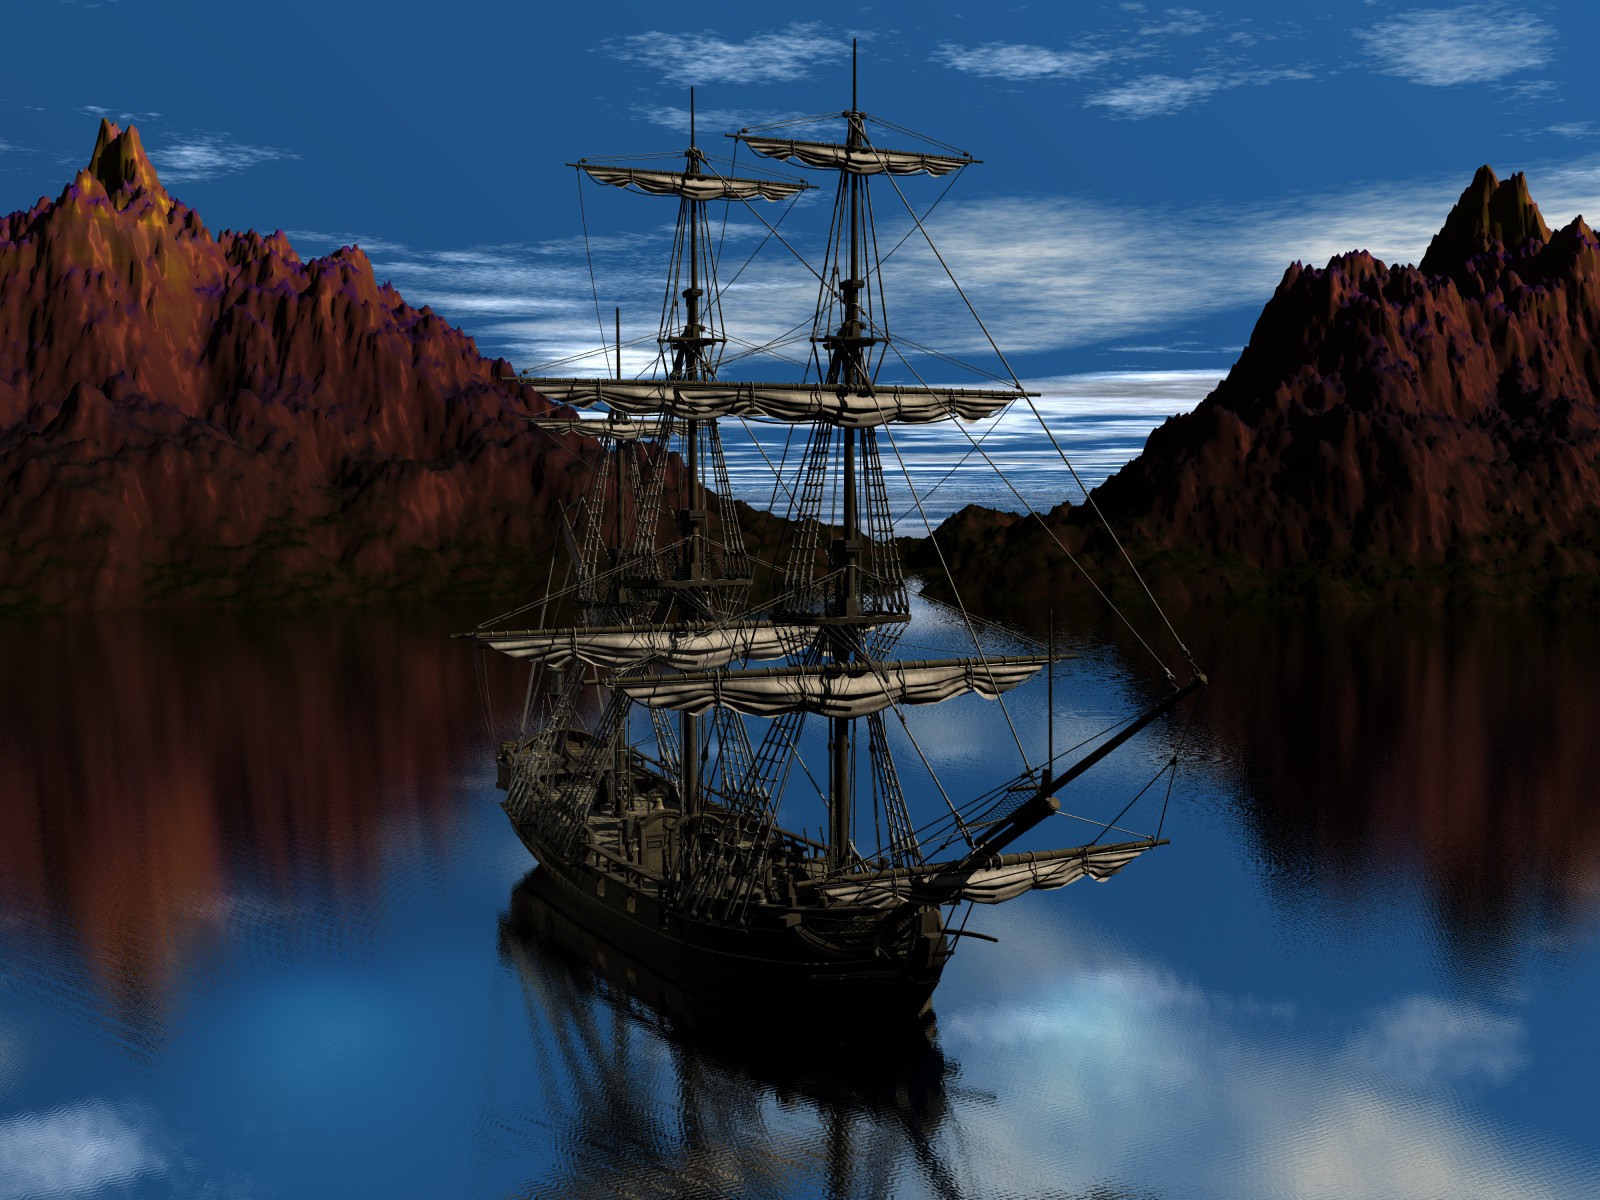 Old Pirate Ship by thedigitalcrayon on